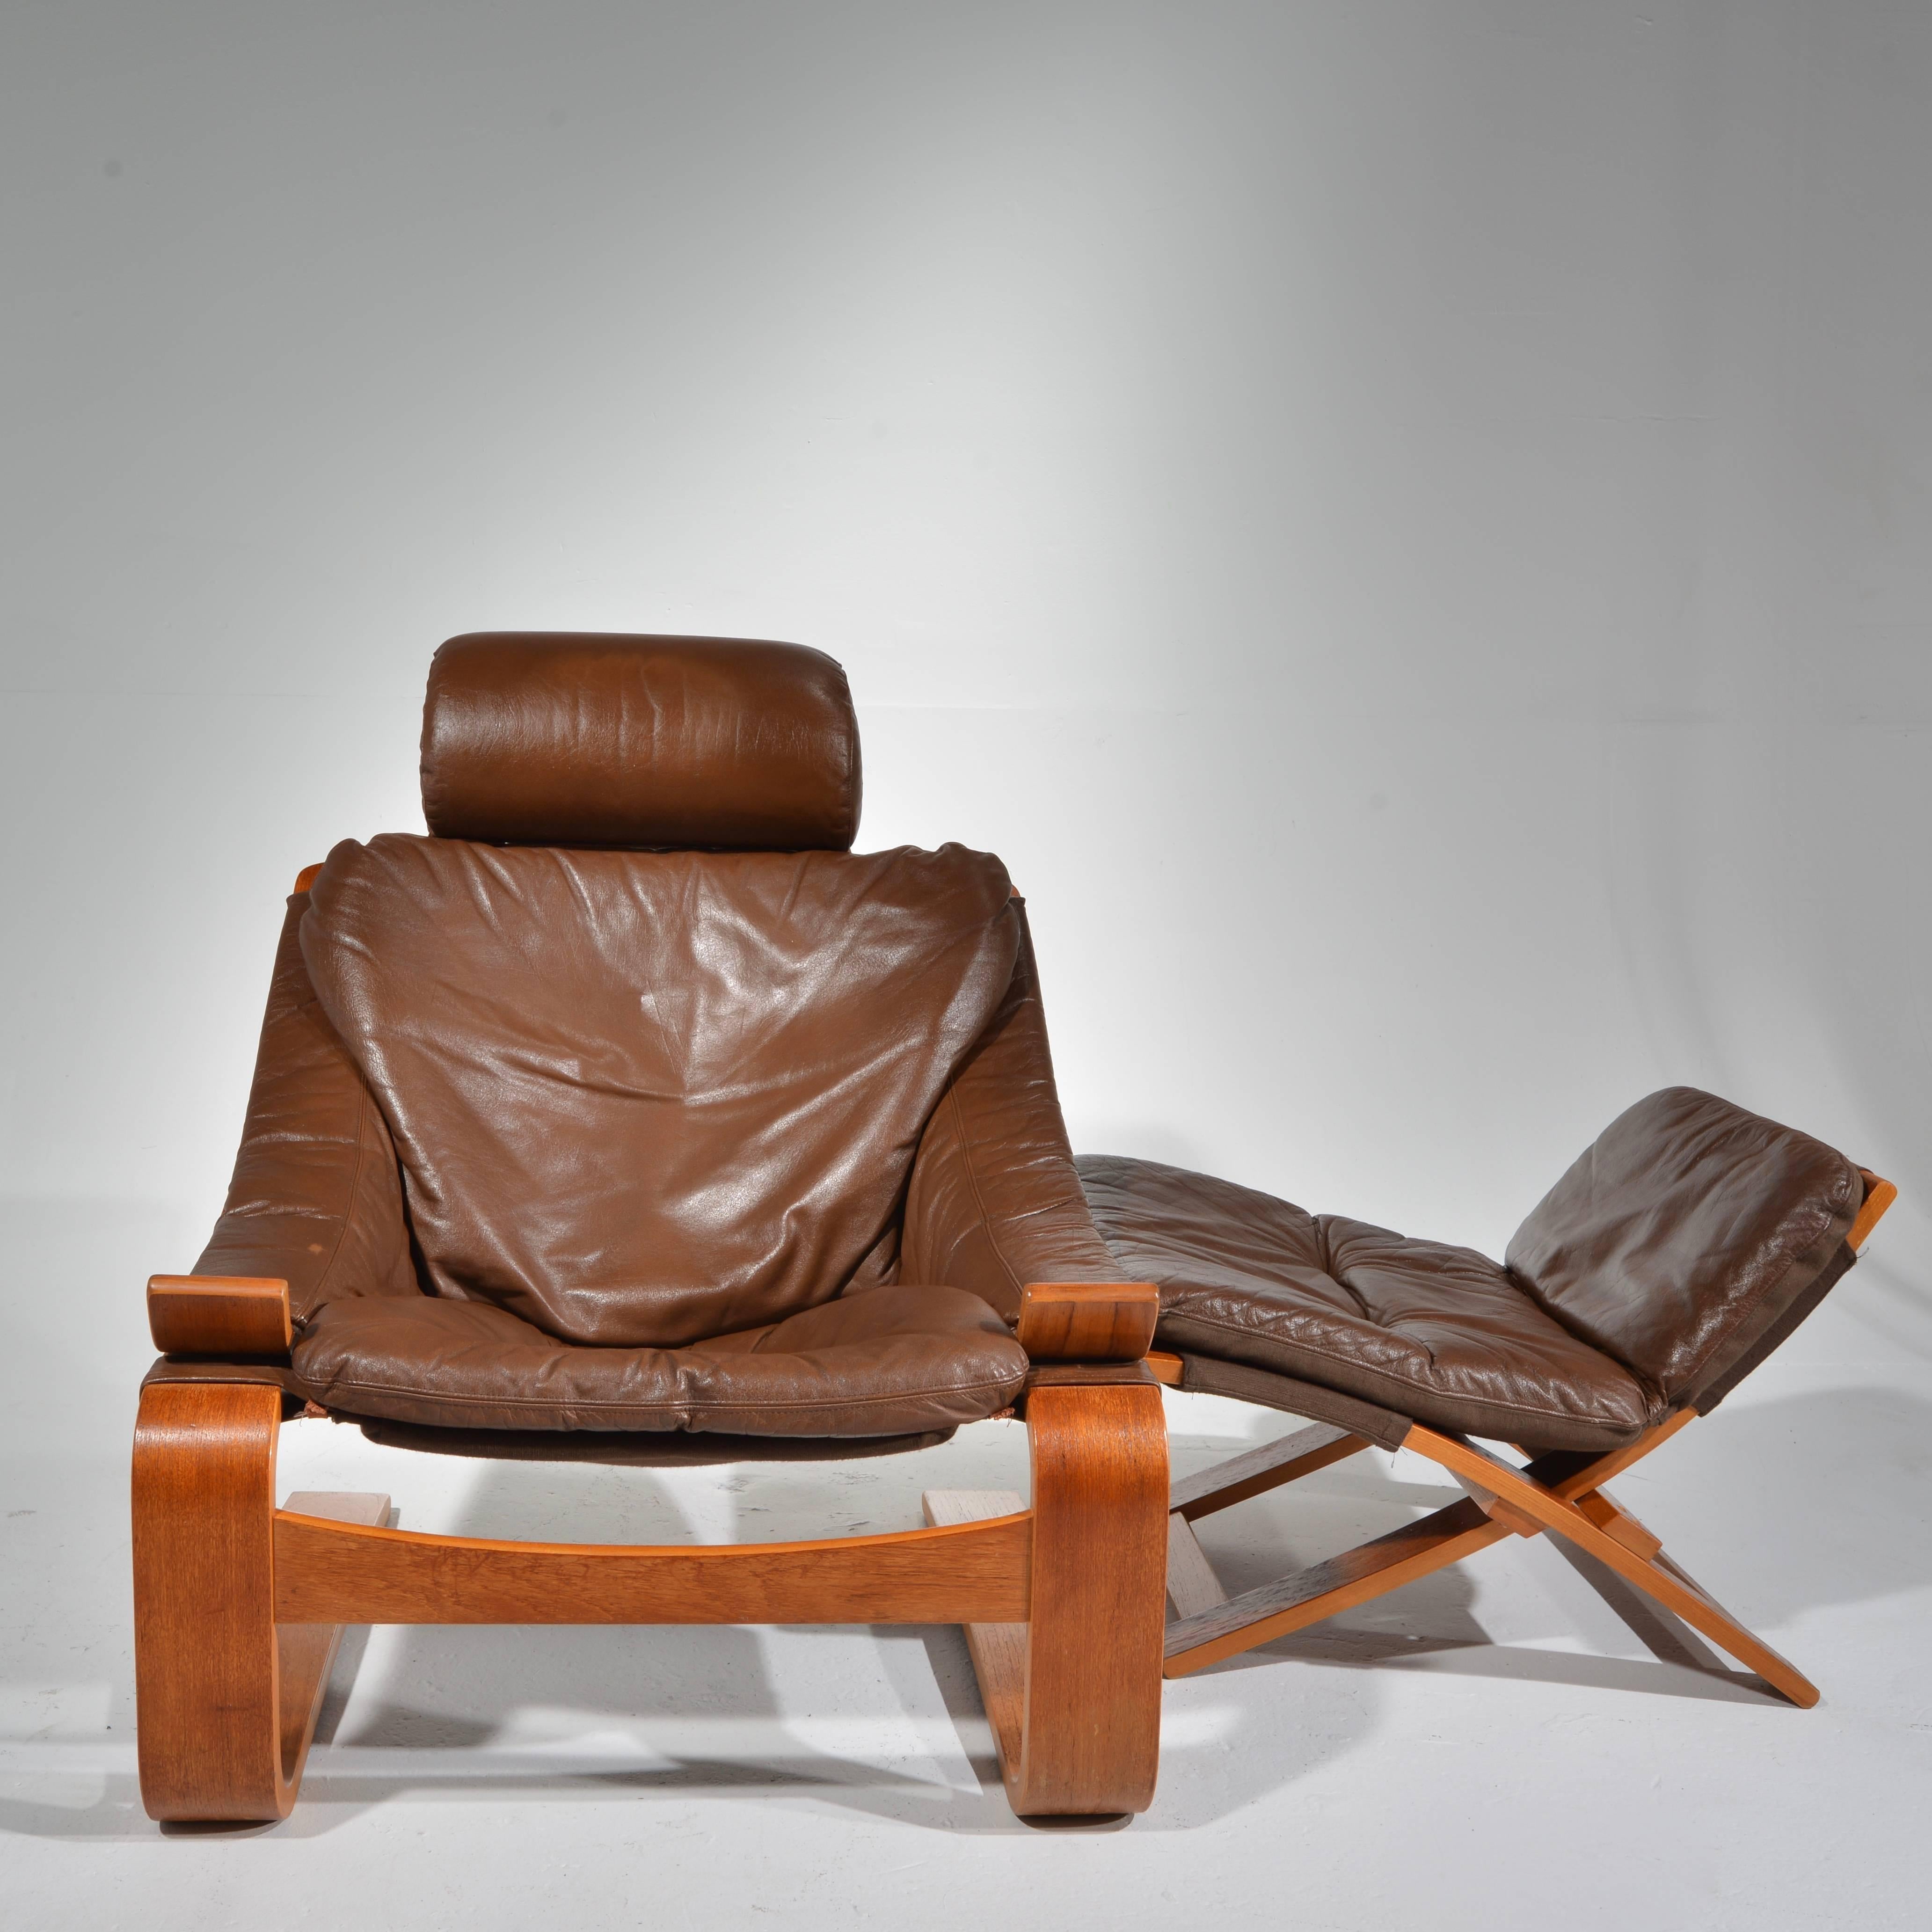 Scandinavian Modern Kroken Teak and Leather Lounge Chair and Stool by Ake Fribytter for Nelo, Sweden